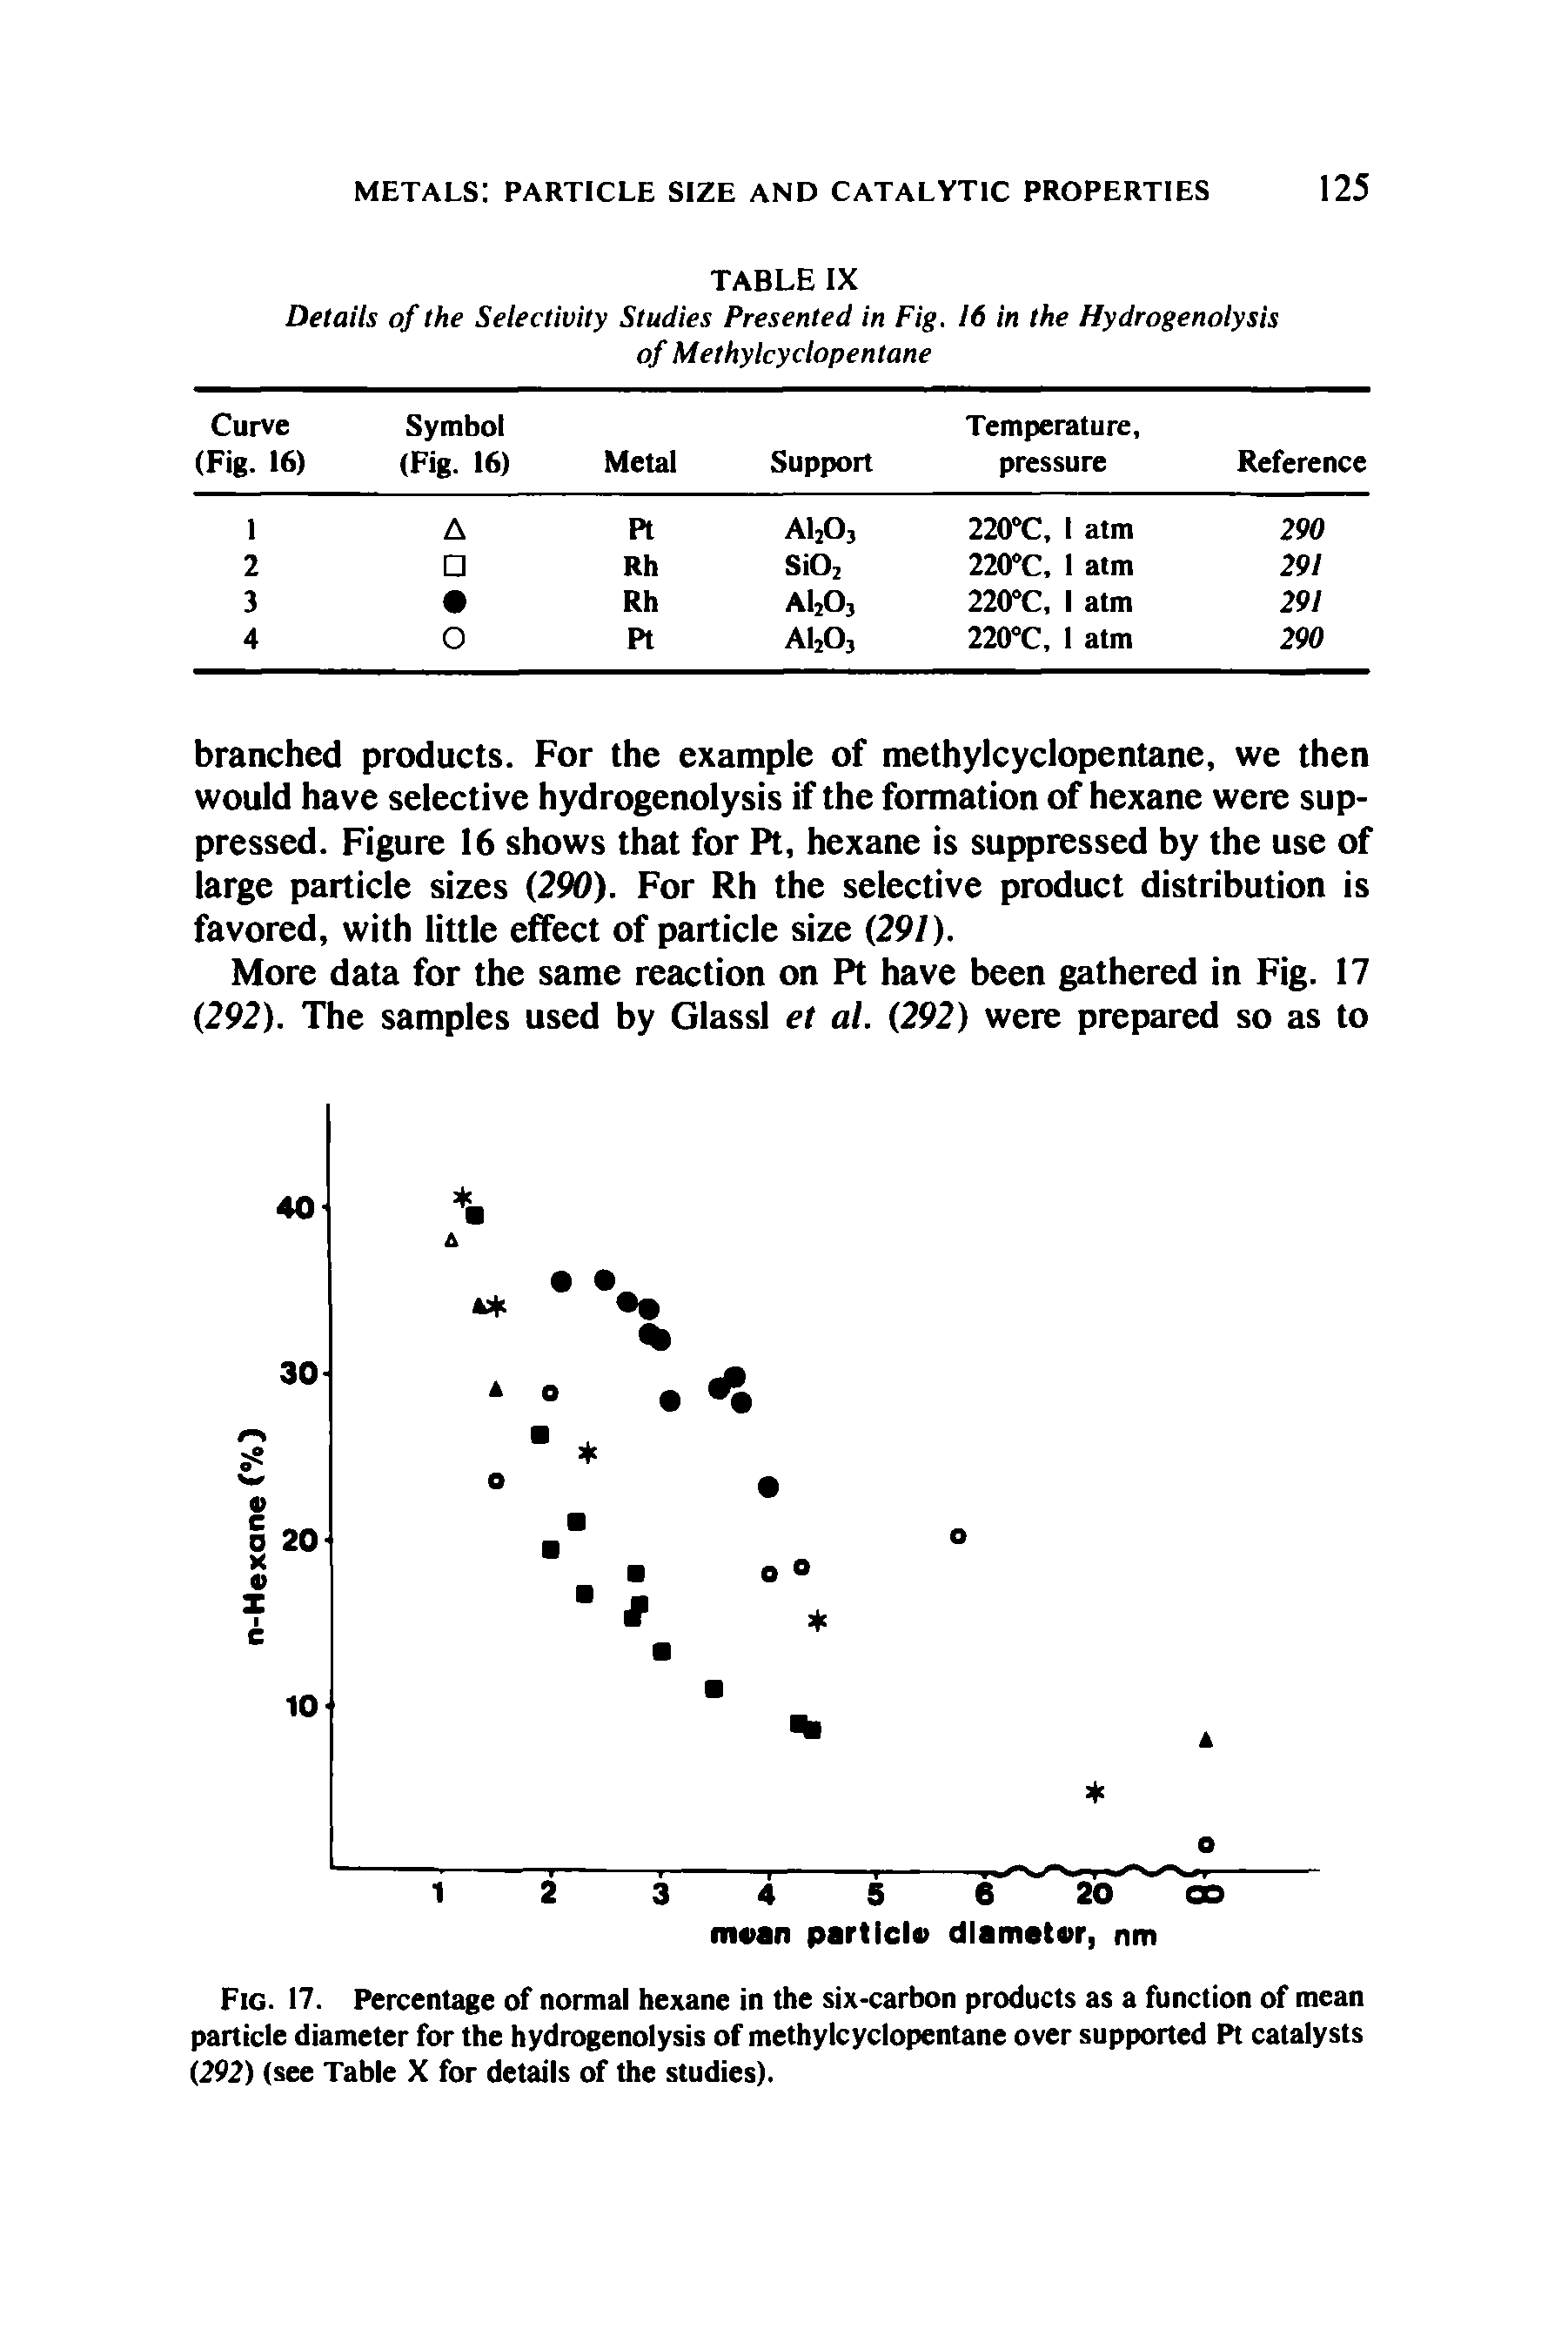 Fig. 17. Percentage of normal hexane in the six-carbon products as a function of mean particle diameter for the hydrogenolysis of methylcyclopentane over supported Pt catalysts (292) (see Table X for details of the studies).